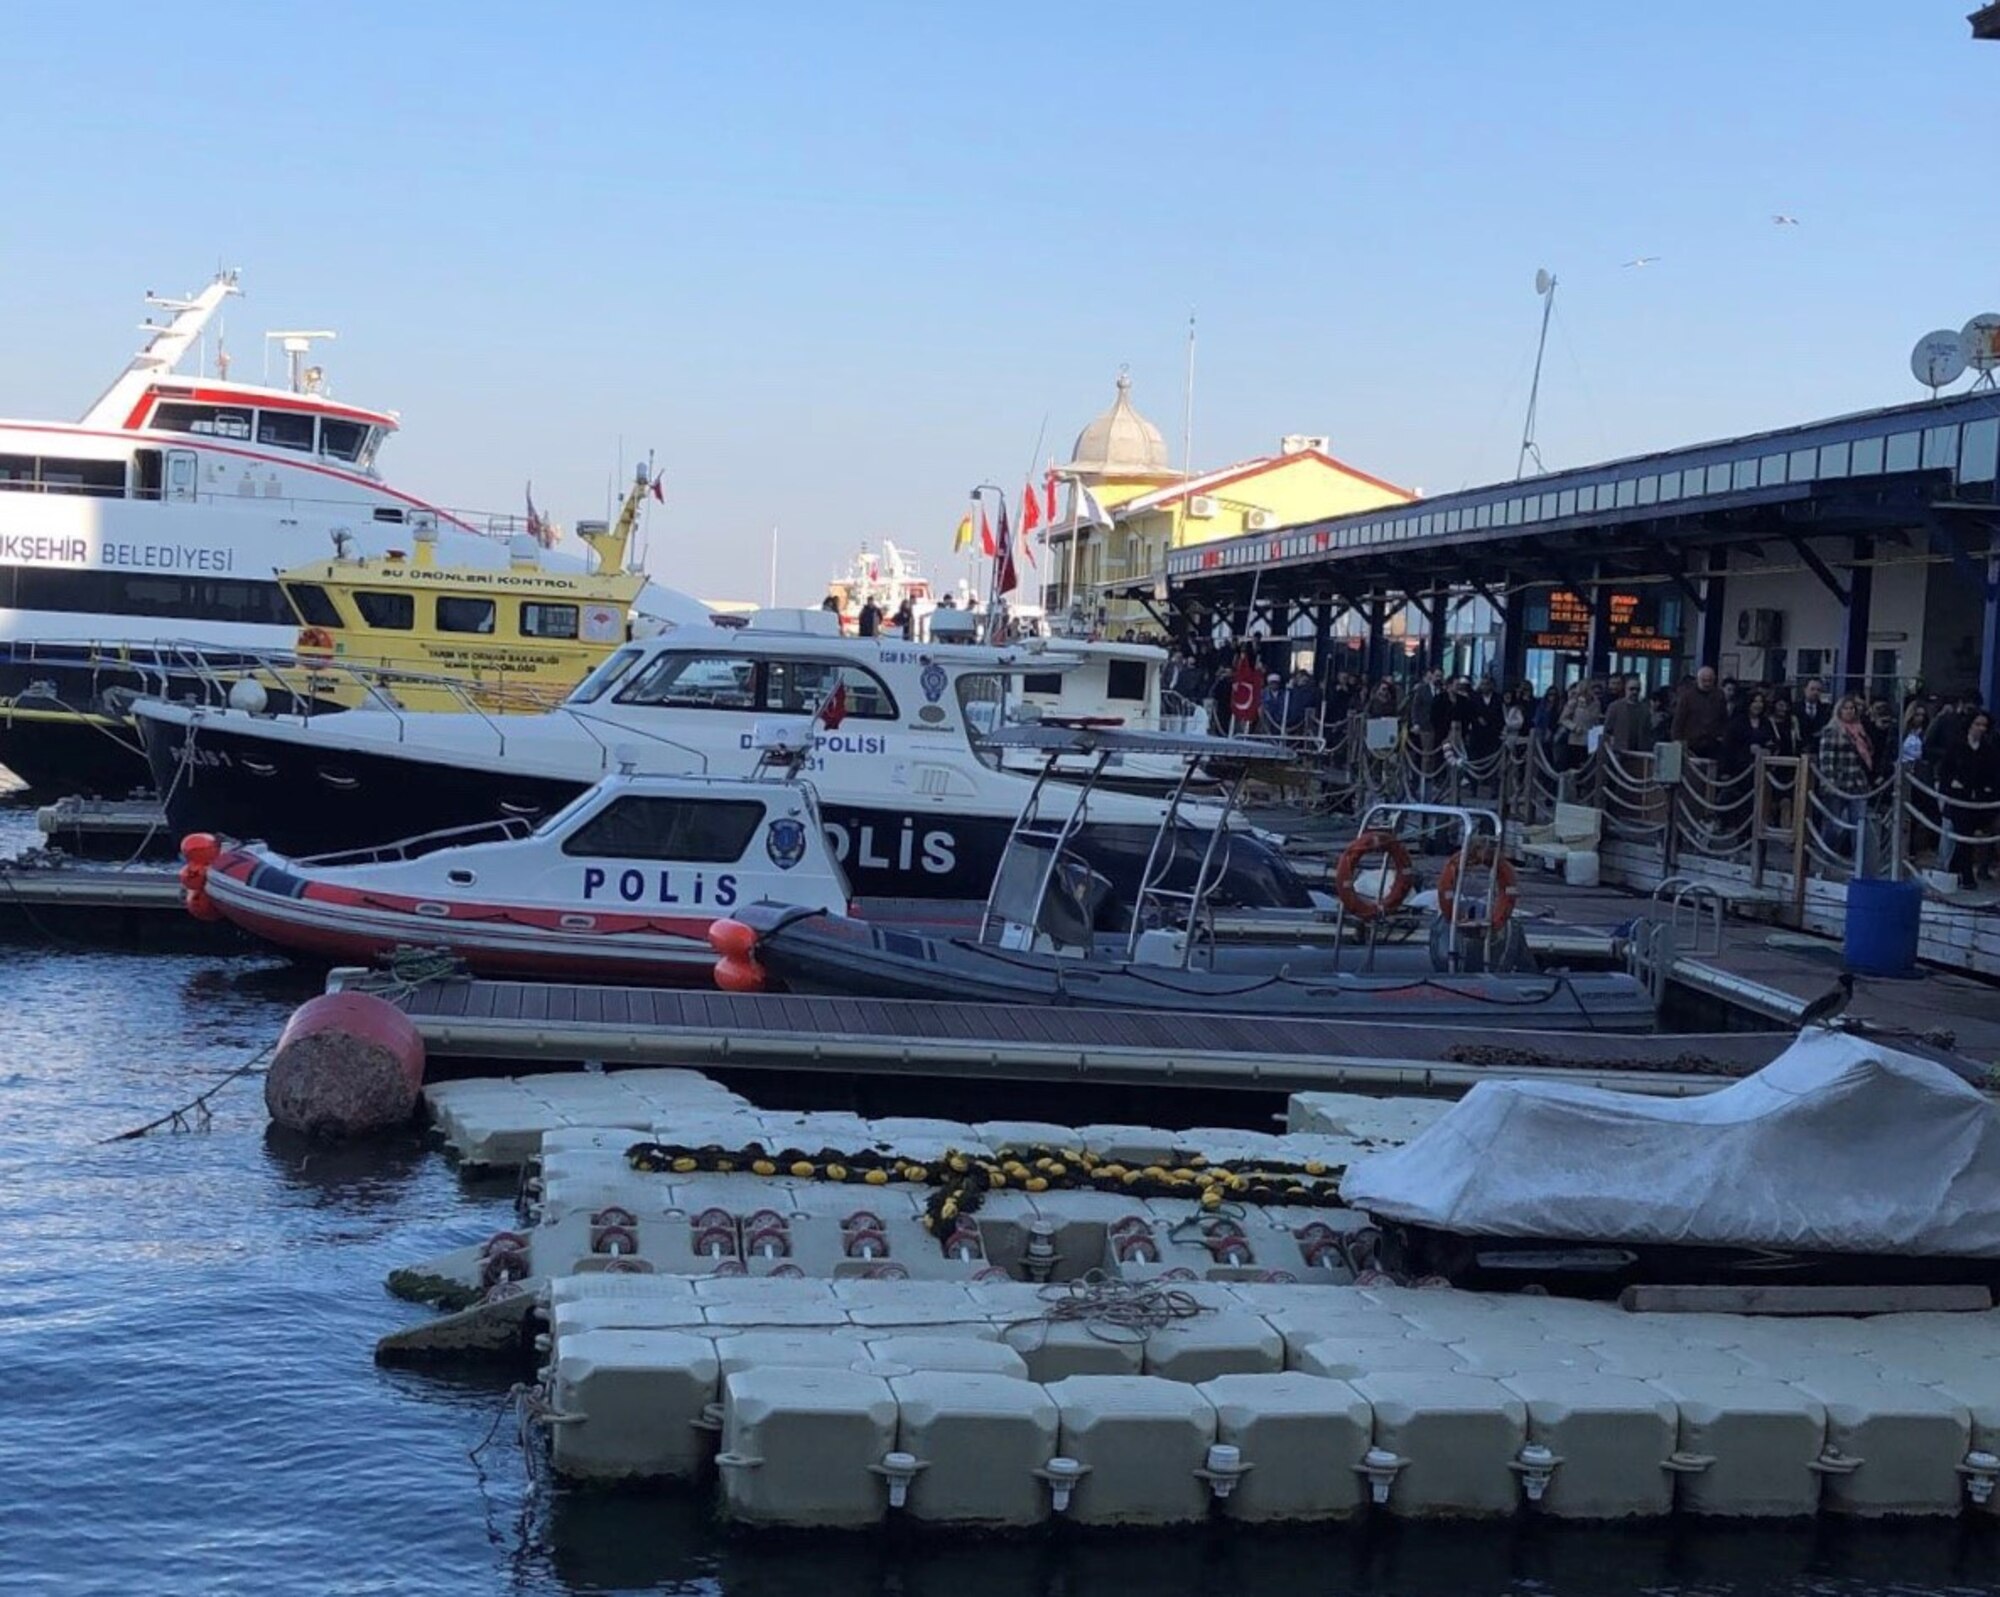 Ferries and boats line the waterway of Pasaport Ferry Terminal March 22, 2019, in Izmir, Turkey. One of the transportation options available to Airmen assigned to the 425th Air Base Squadron is the commuter ferry service. (Courtesy photo)